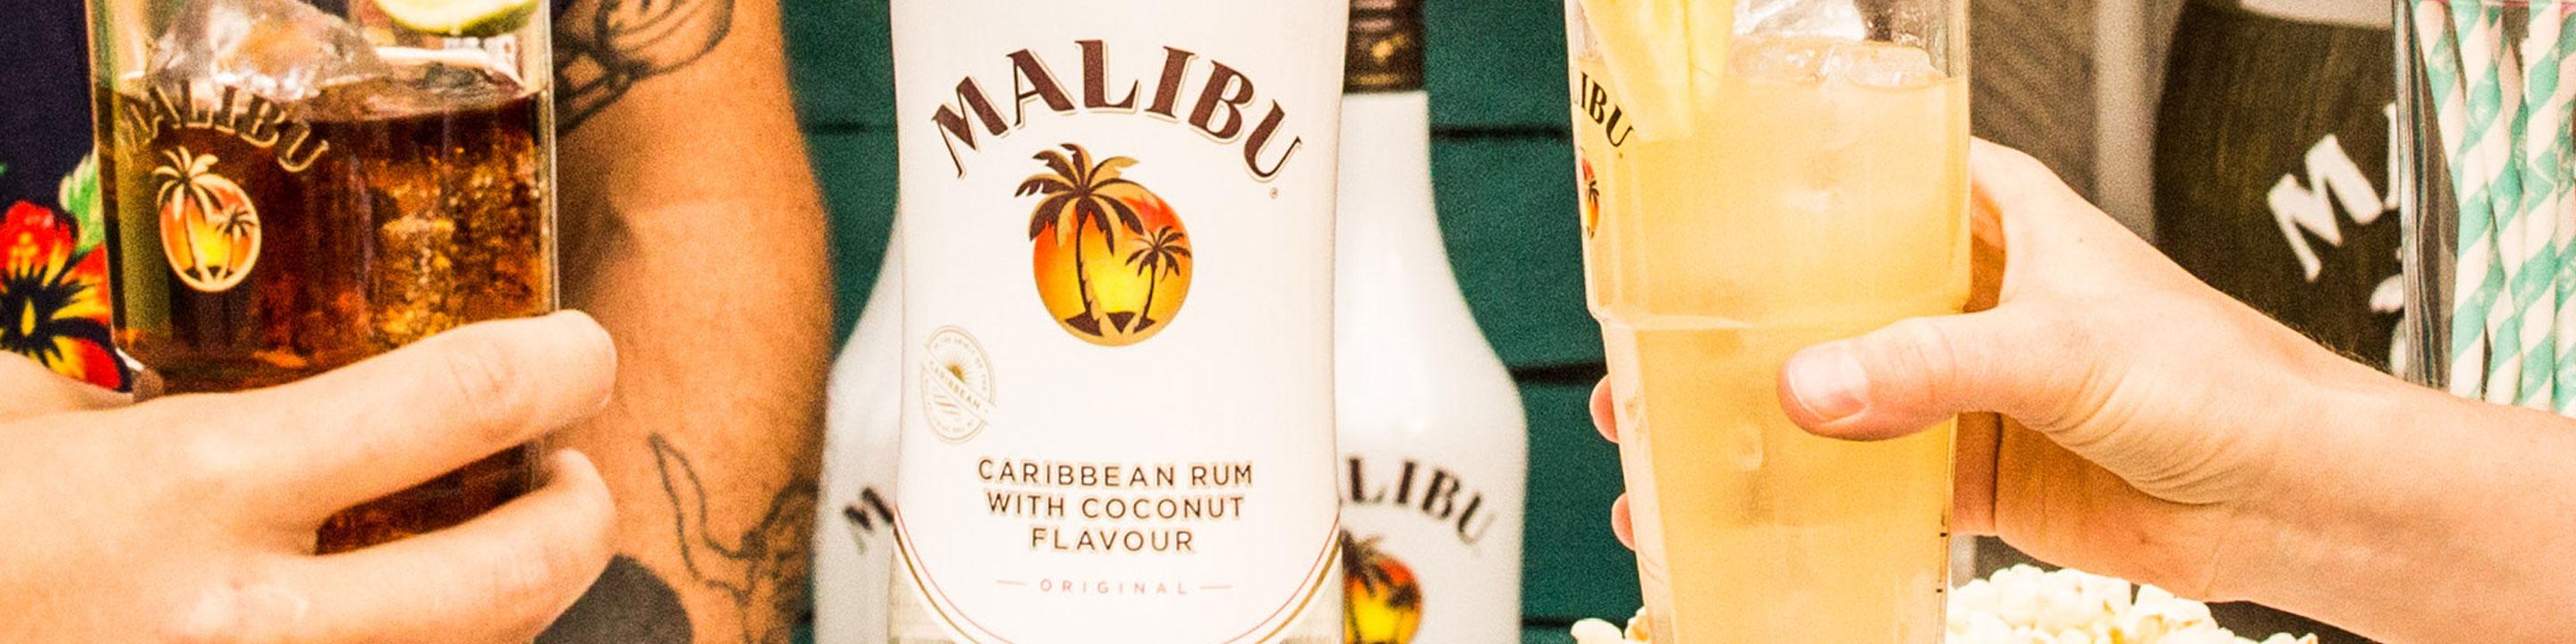 Nothing beats an original. But Malibu isn't just an original, it's sunshine in a bottle with a smooth fresh flavor. That's why it's the world's best-selling coconut flavored Caribbean rum. Buy Malibu online now from your nearby liquor store via Minibar Delivery. 